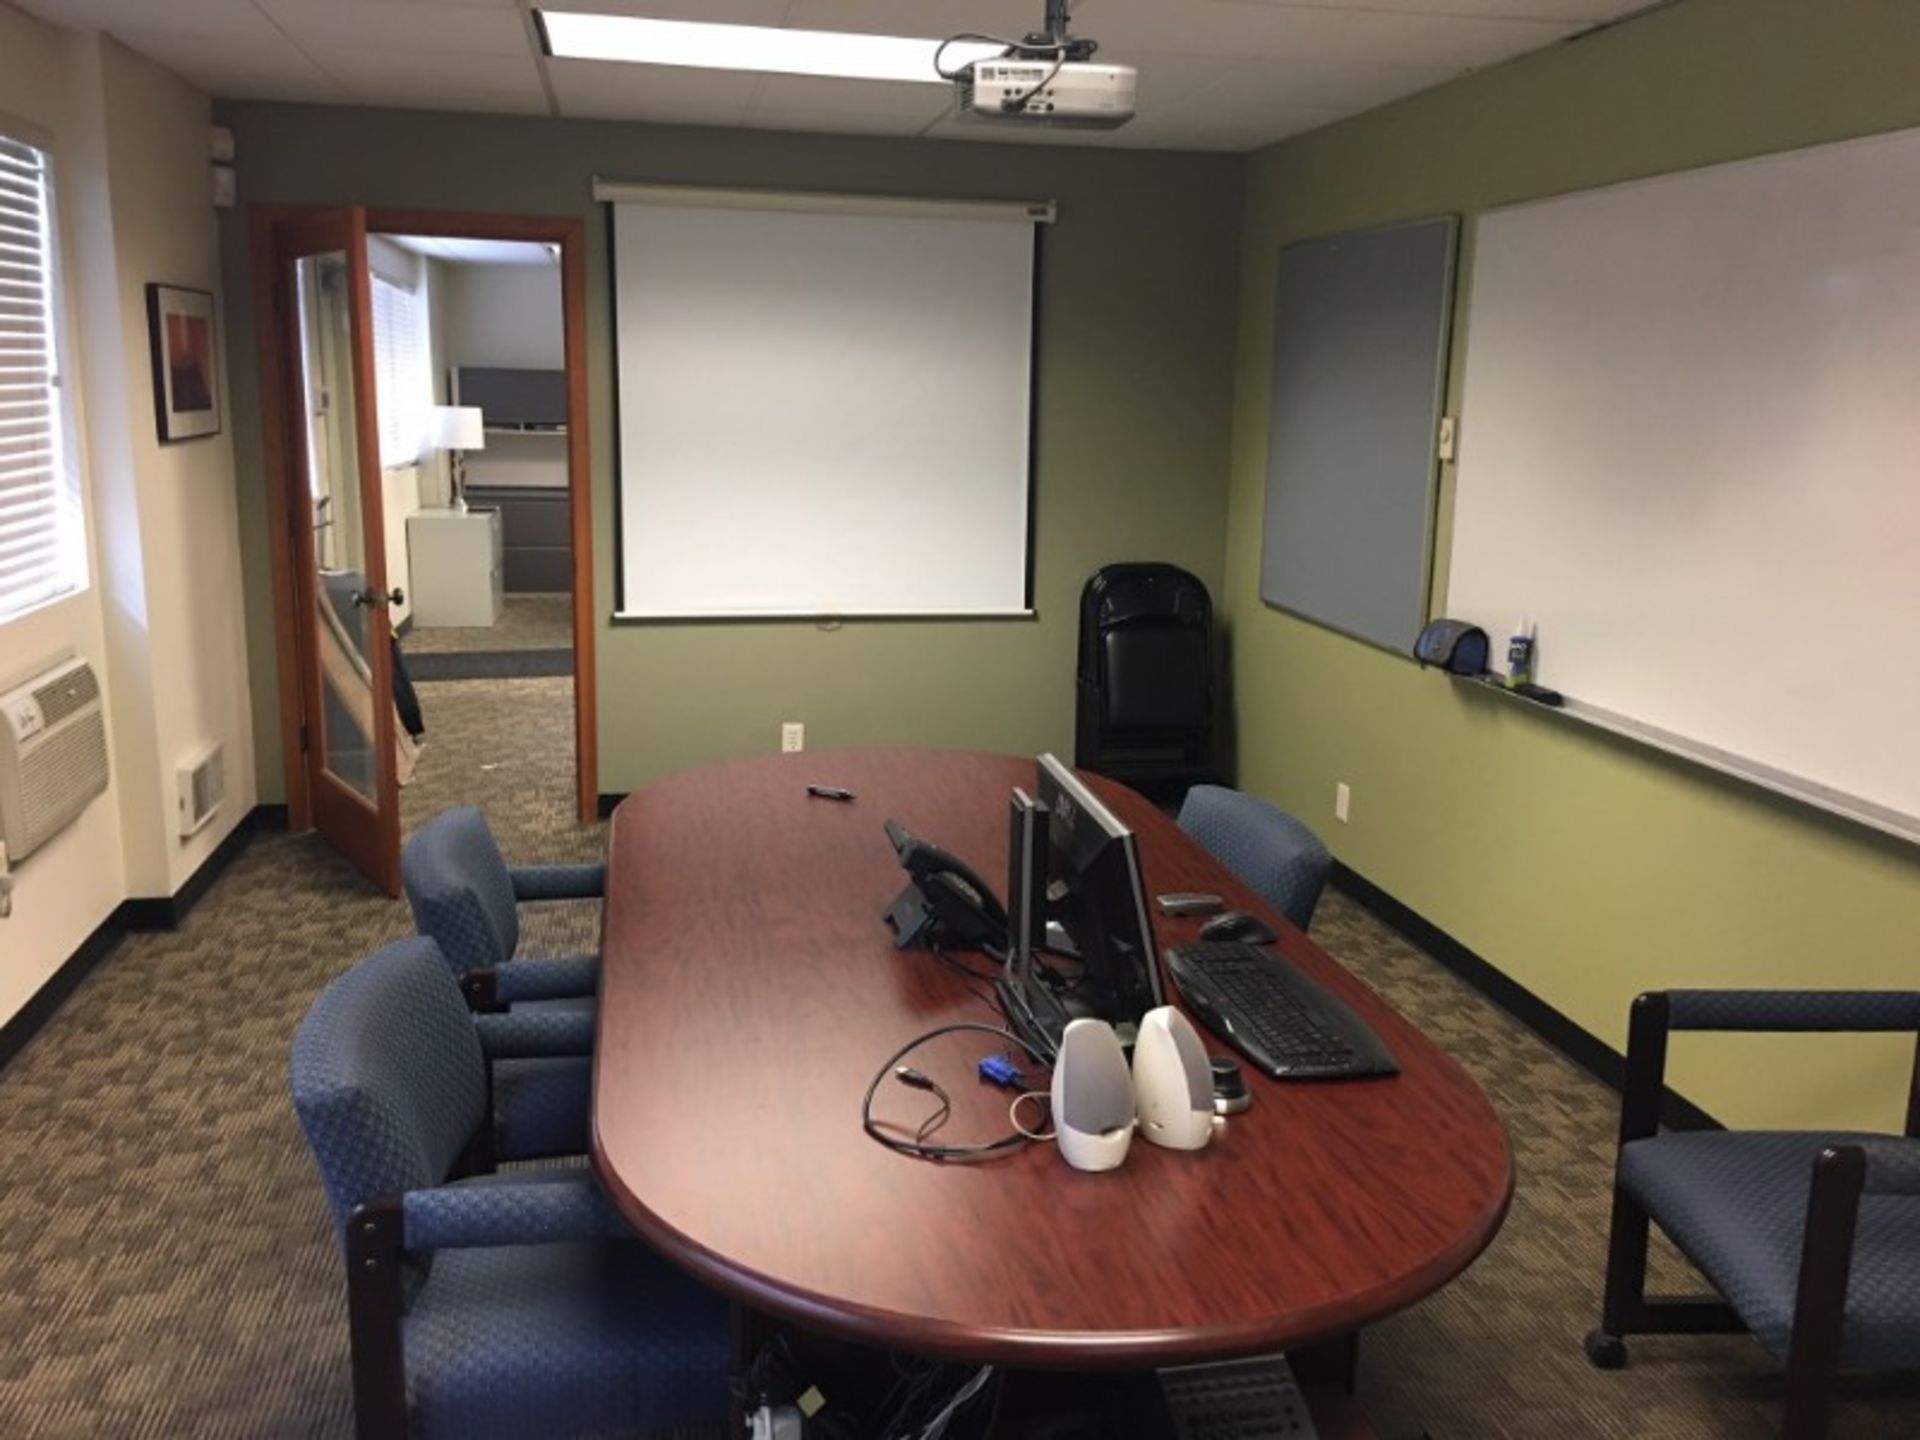 Room Content, Conference Table with Chairs & Projector - Image 9 of 9